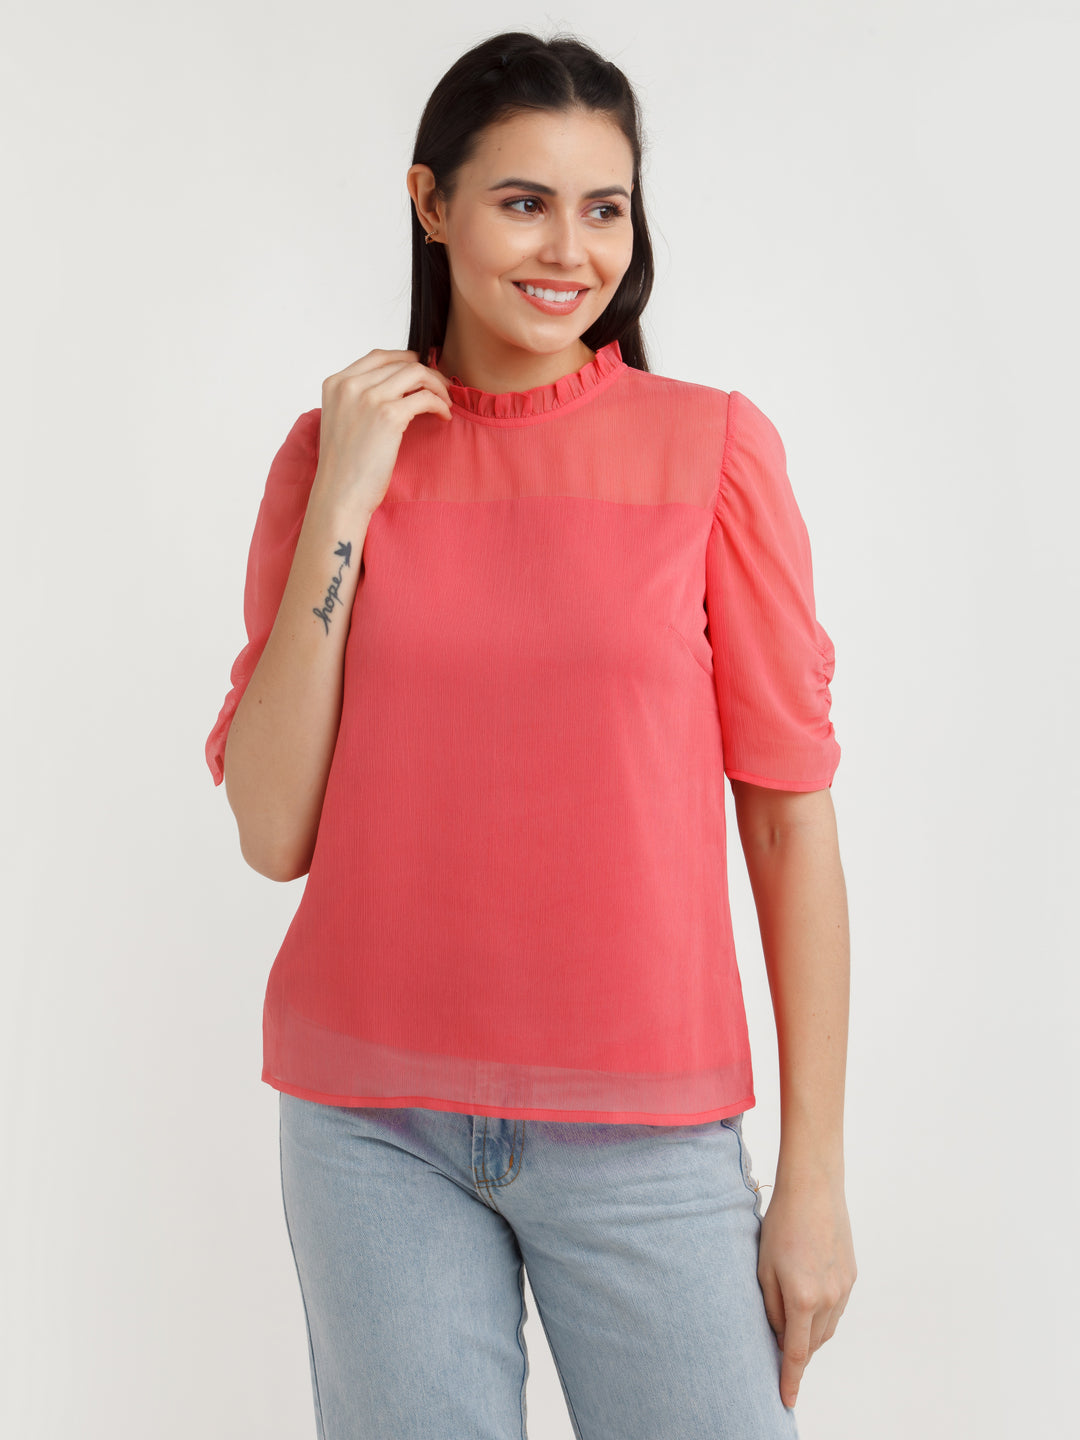 Coral Solid Top For Women